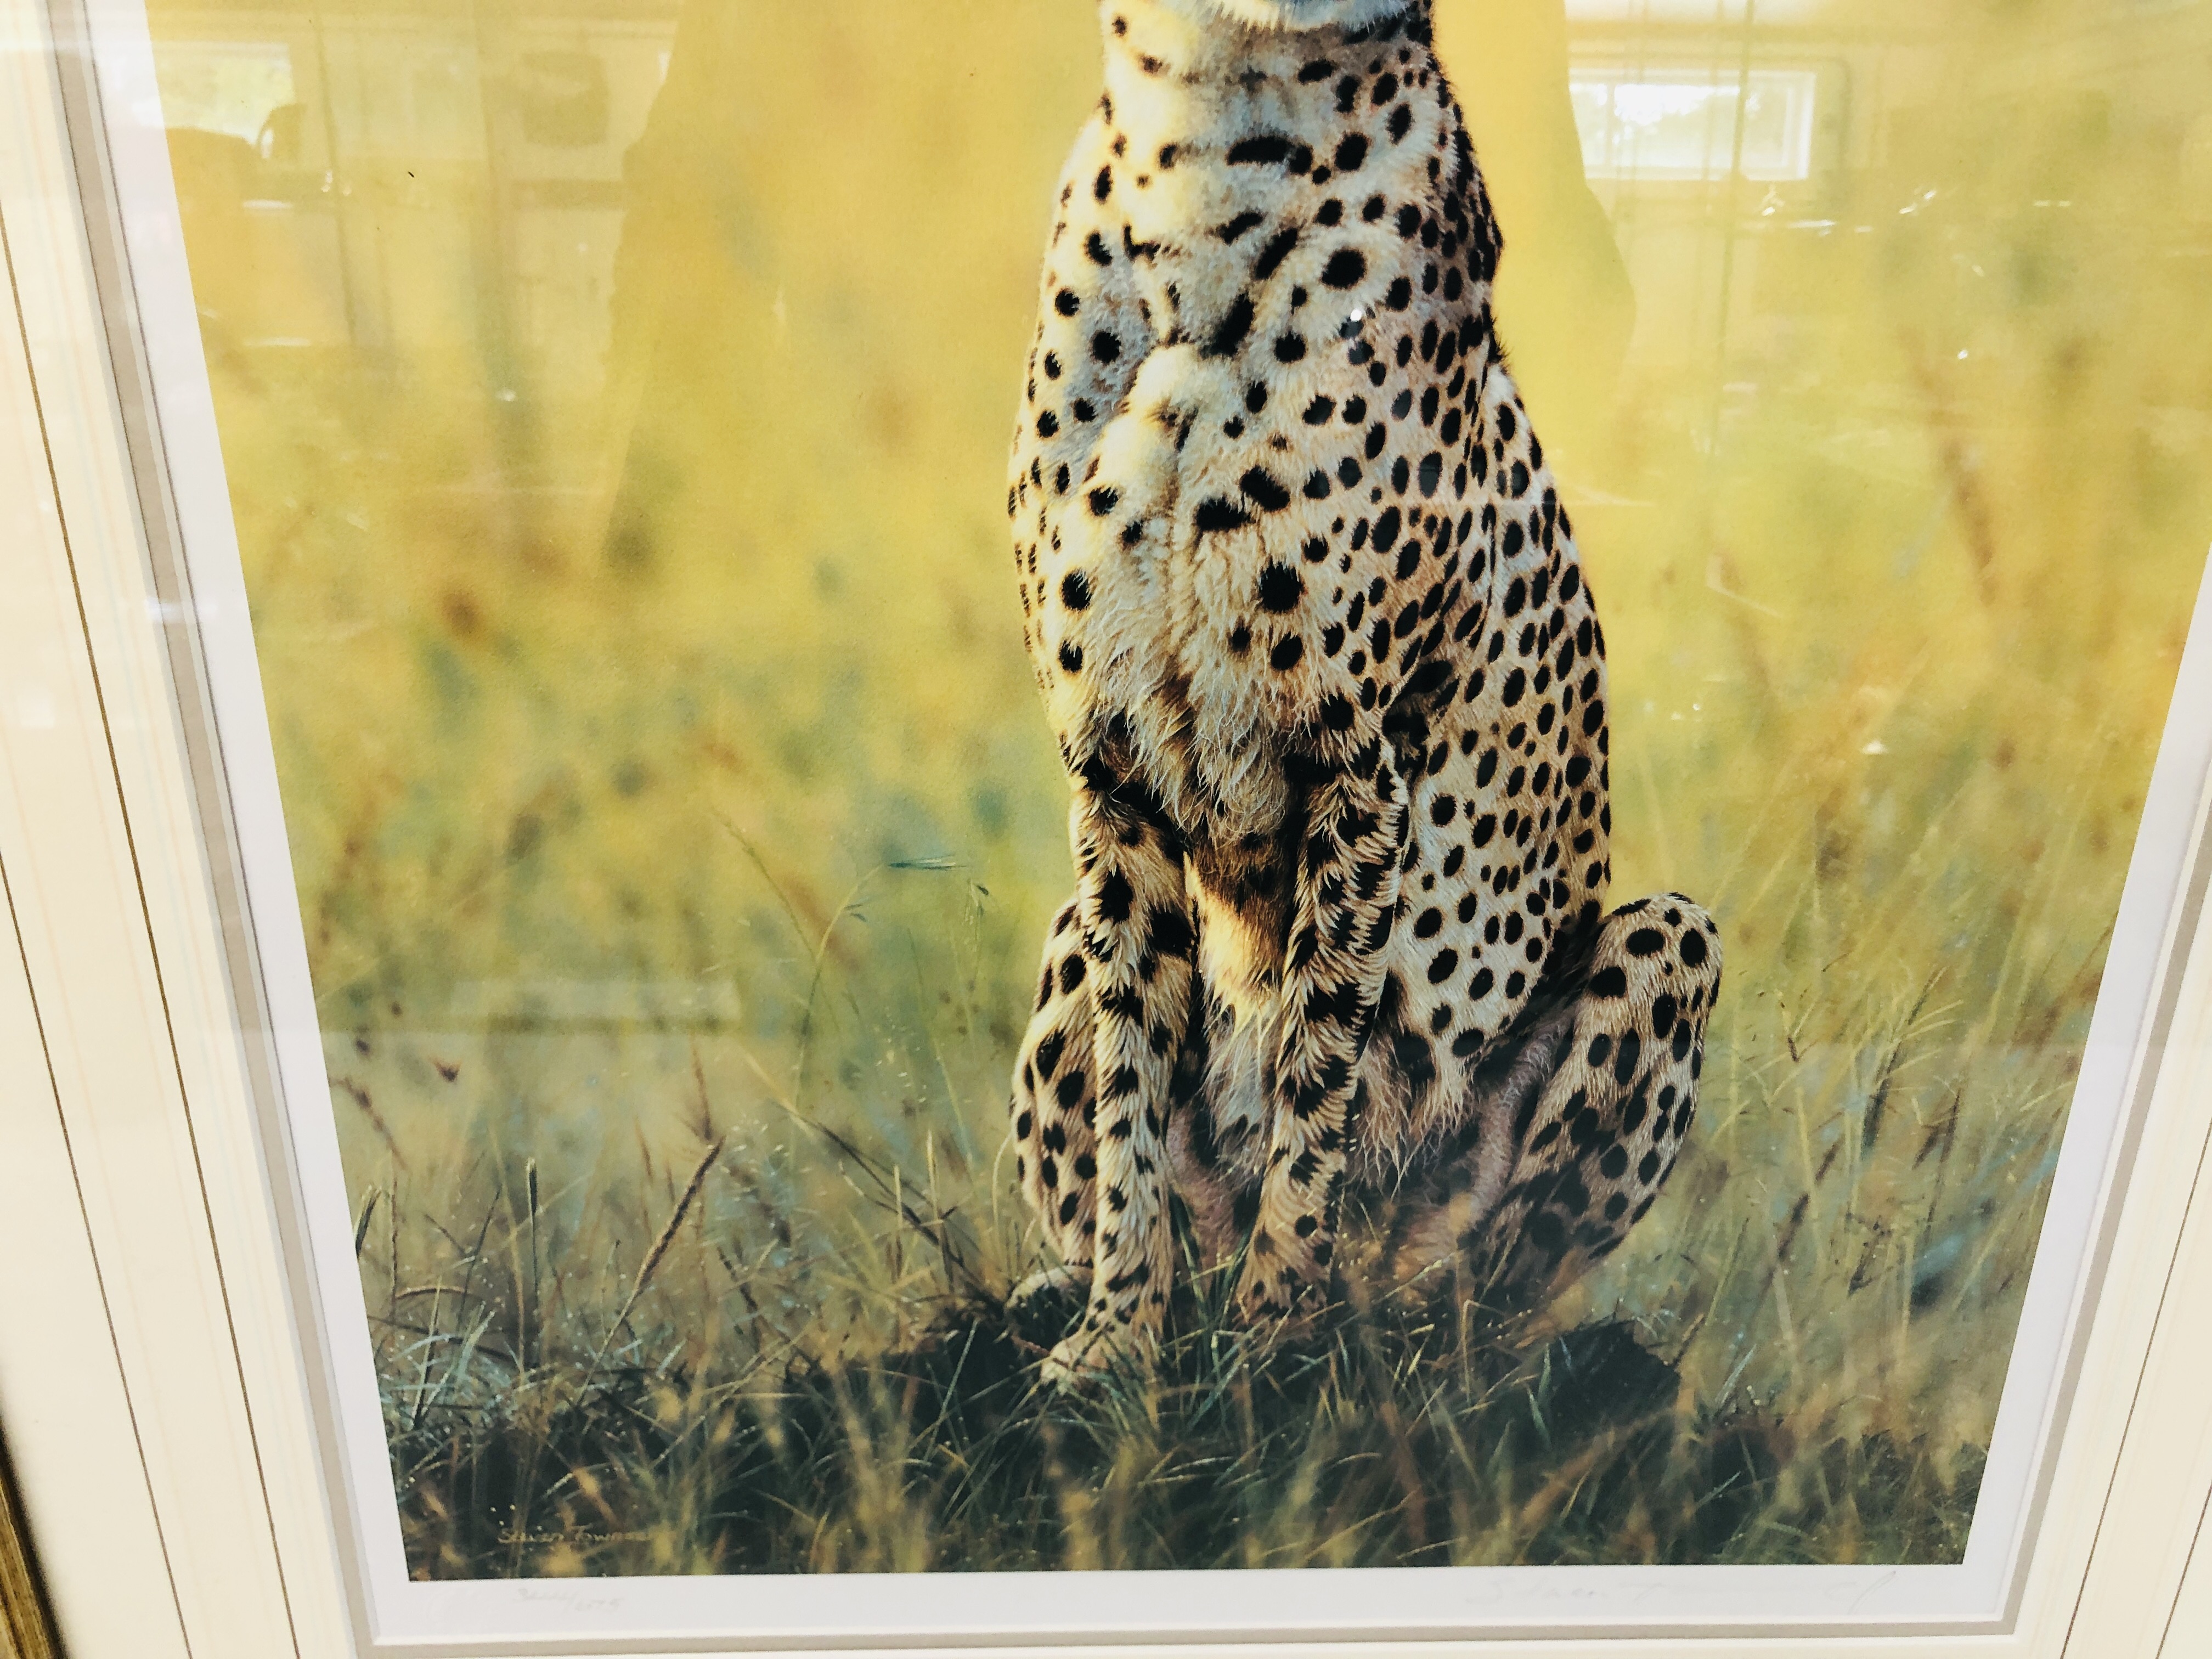 A LIMITED EDITION FRAMED PRINT OF A CHEETAH 344/675 SIGNED STEVEN TOWNSEND. - Image 3 of 3